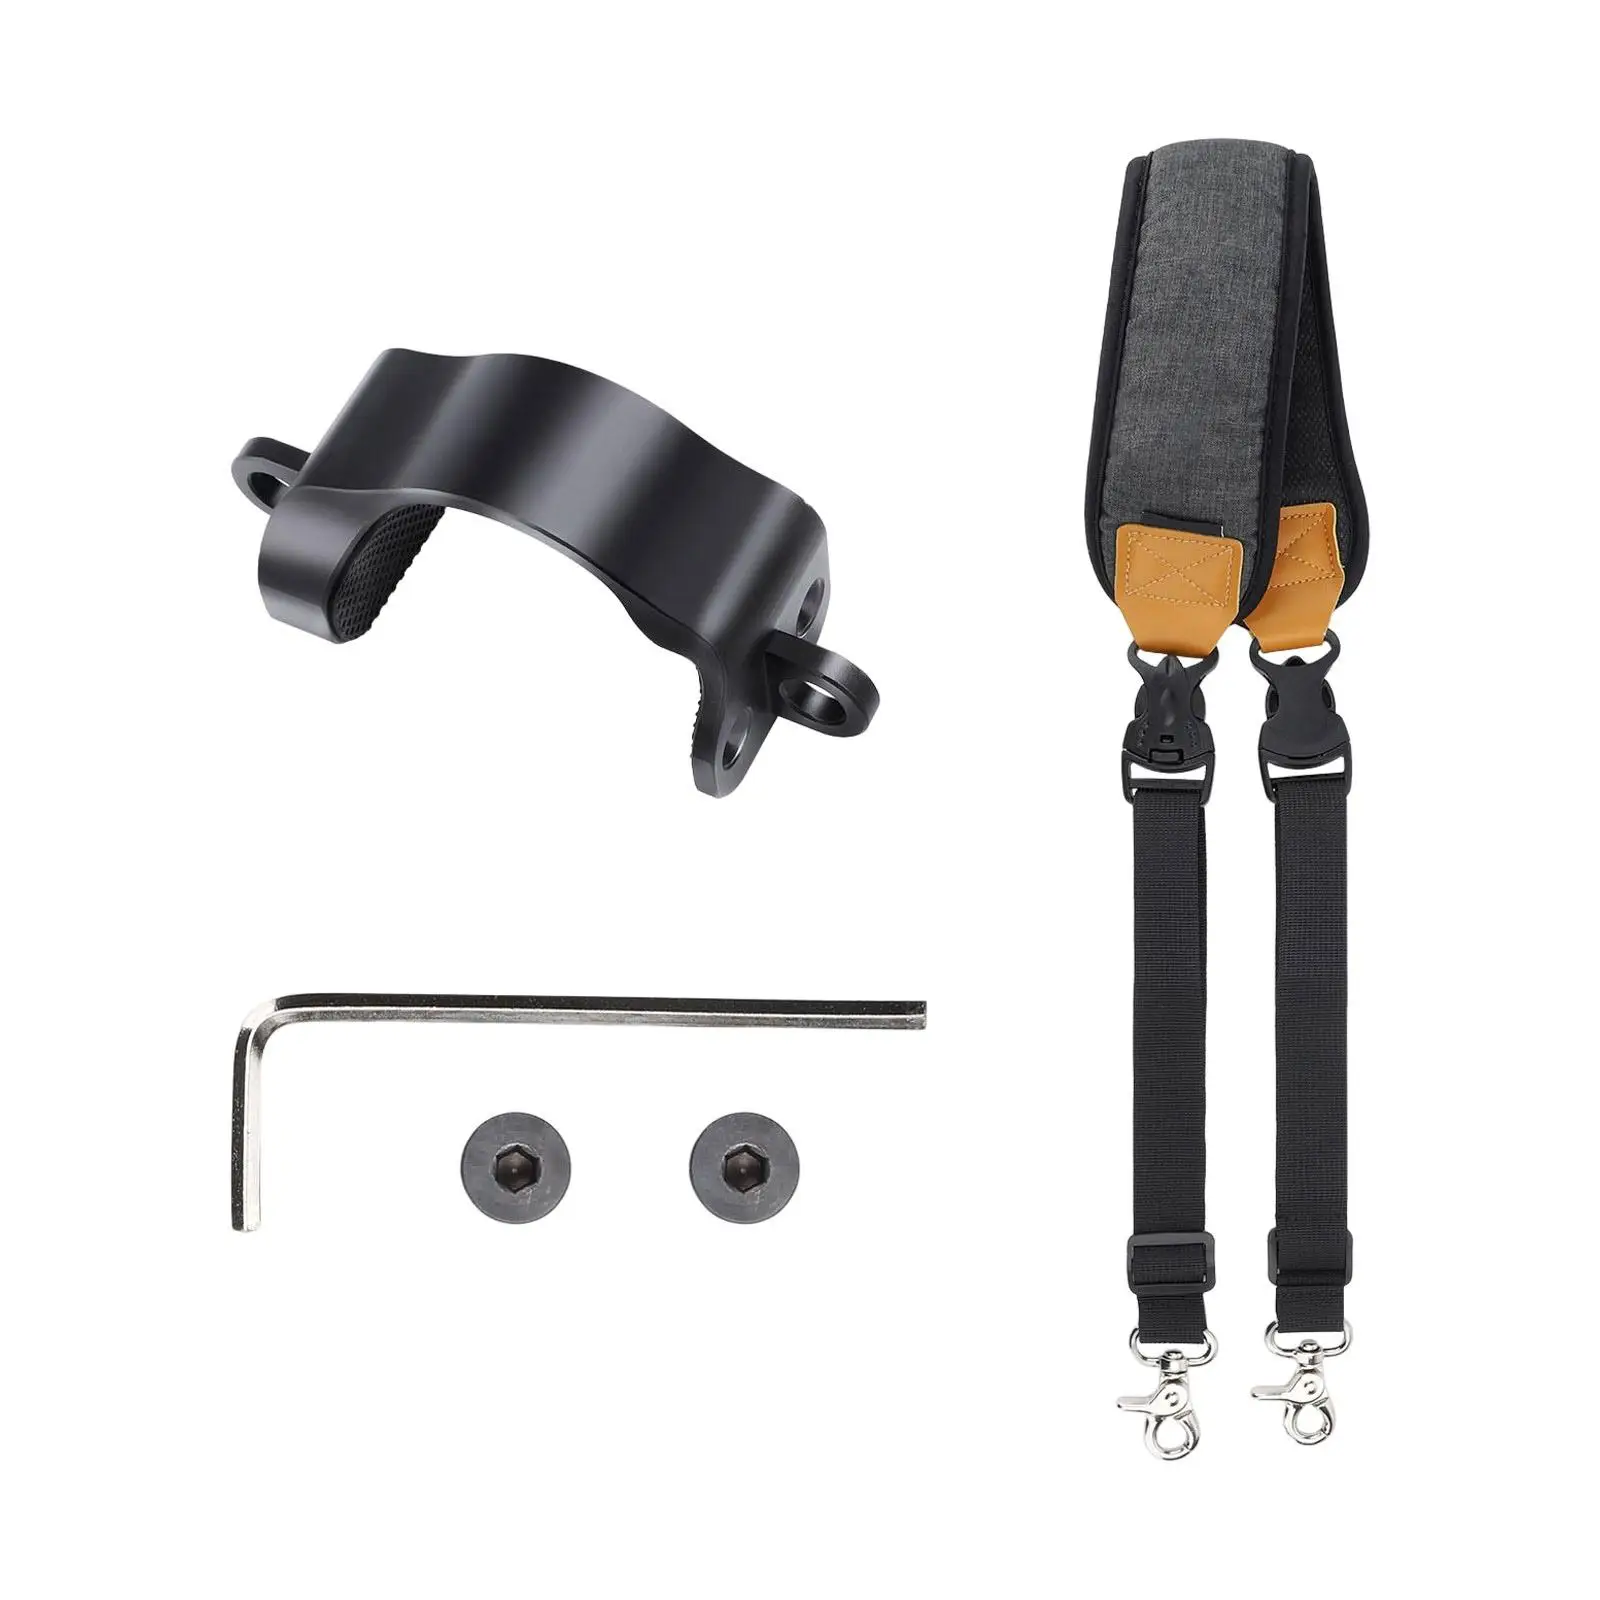 Handheld Gimbal Stabilizer Lanyard Neck Strap Black Quick Release and Quick Installation for RS3 Mini